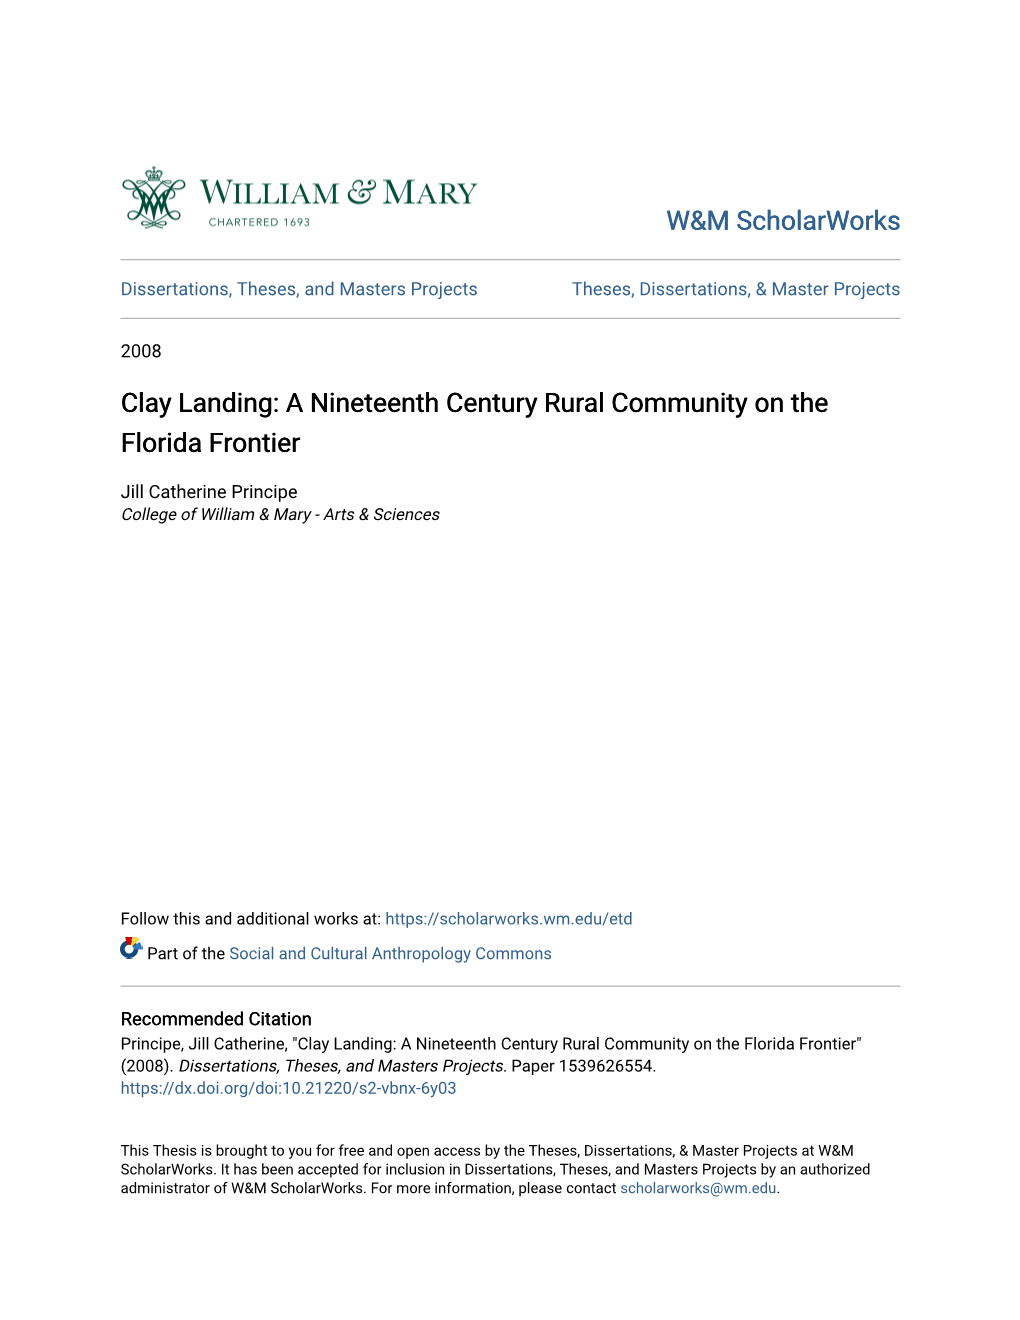 Clay Landing: a Nineteenth Century Rural Community on the Florida Frontier